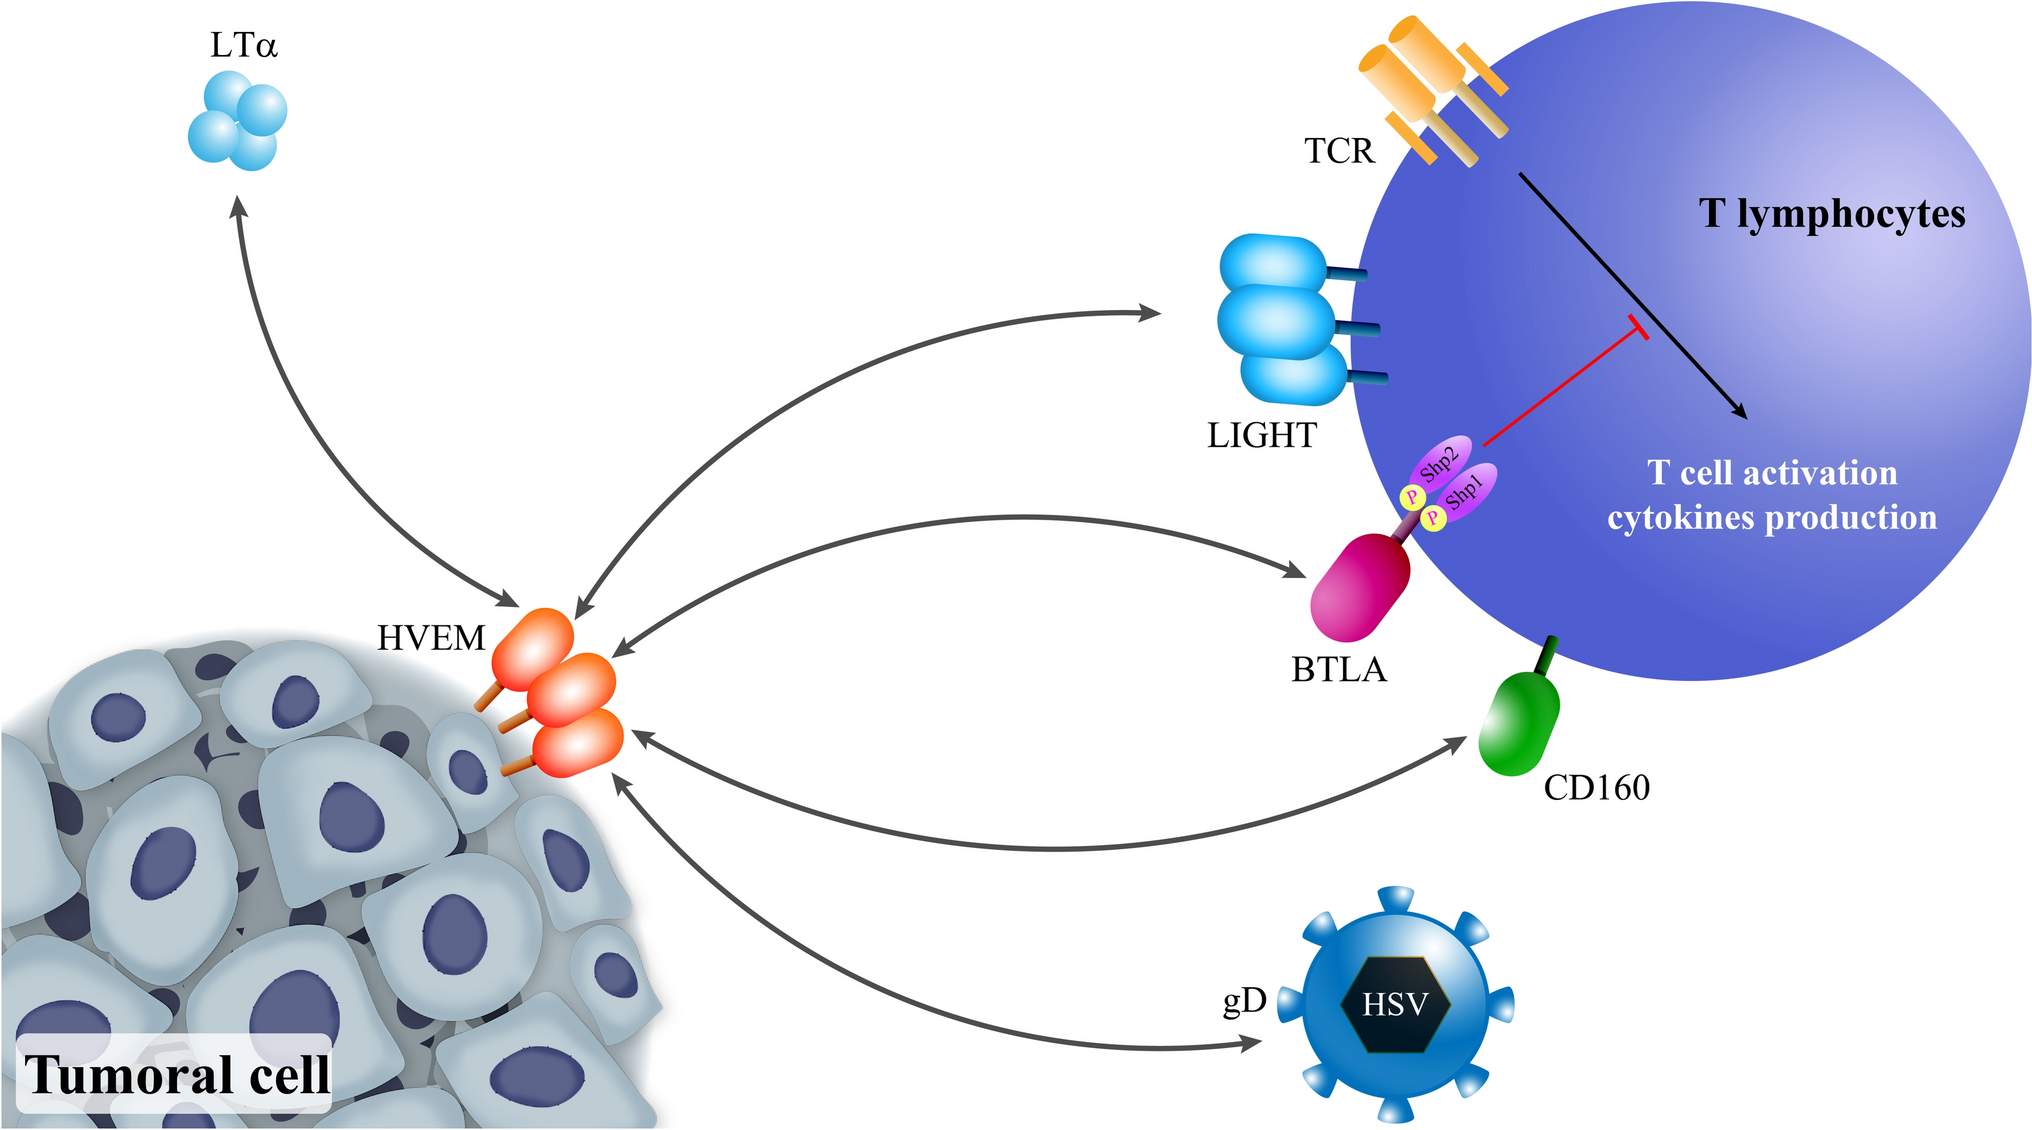 The role of the BTLA–HVEM complex in the pathogenesis of breast cancer